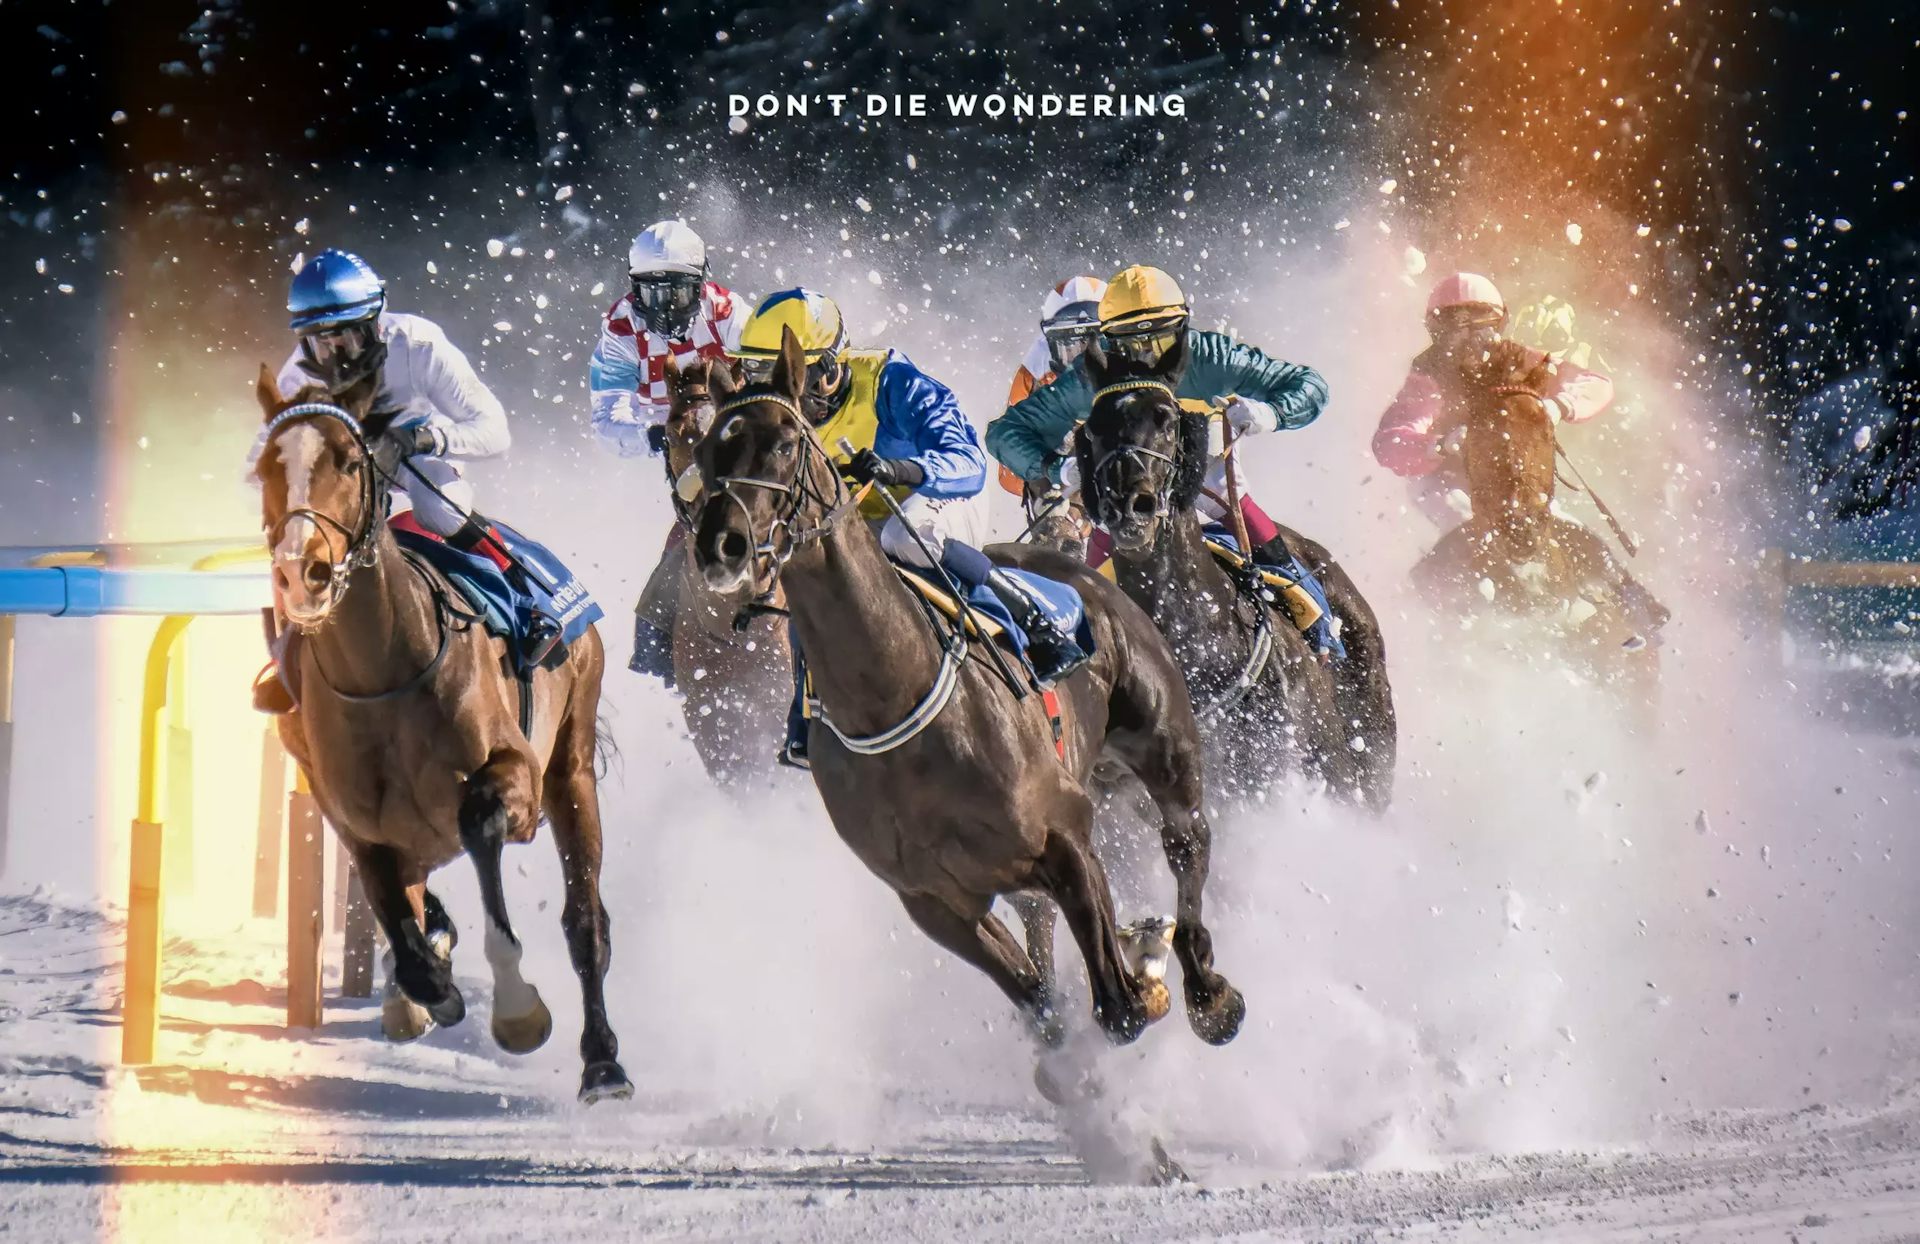 White Turf in St. Moritz – The Rich go Horse Racing in the Snow